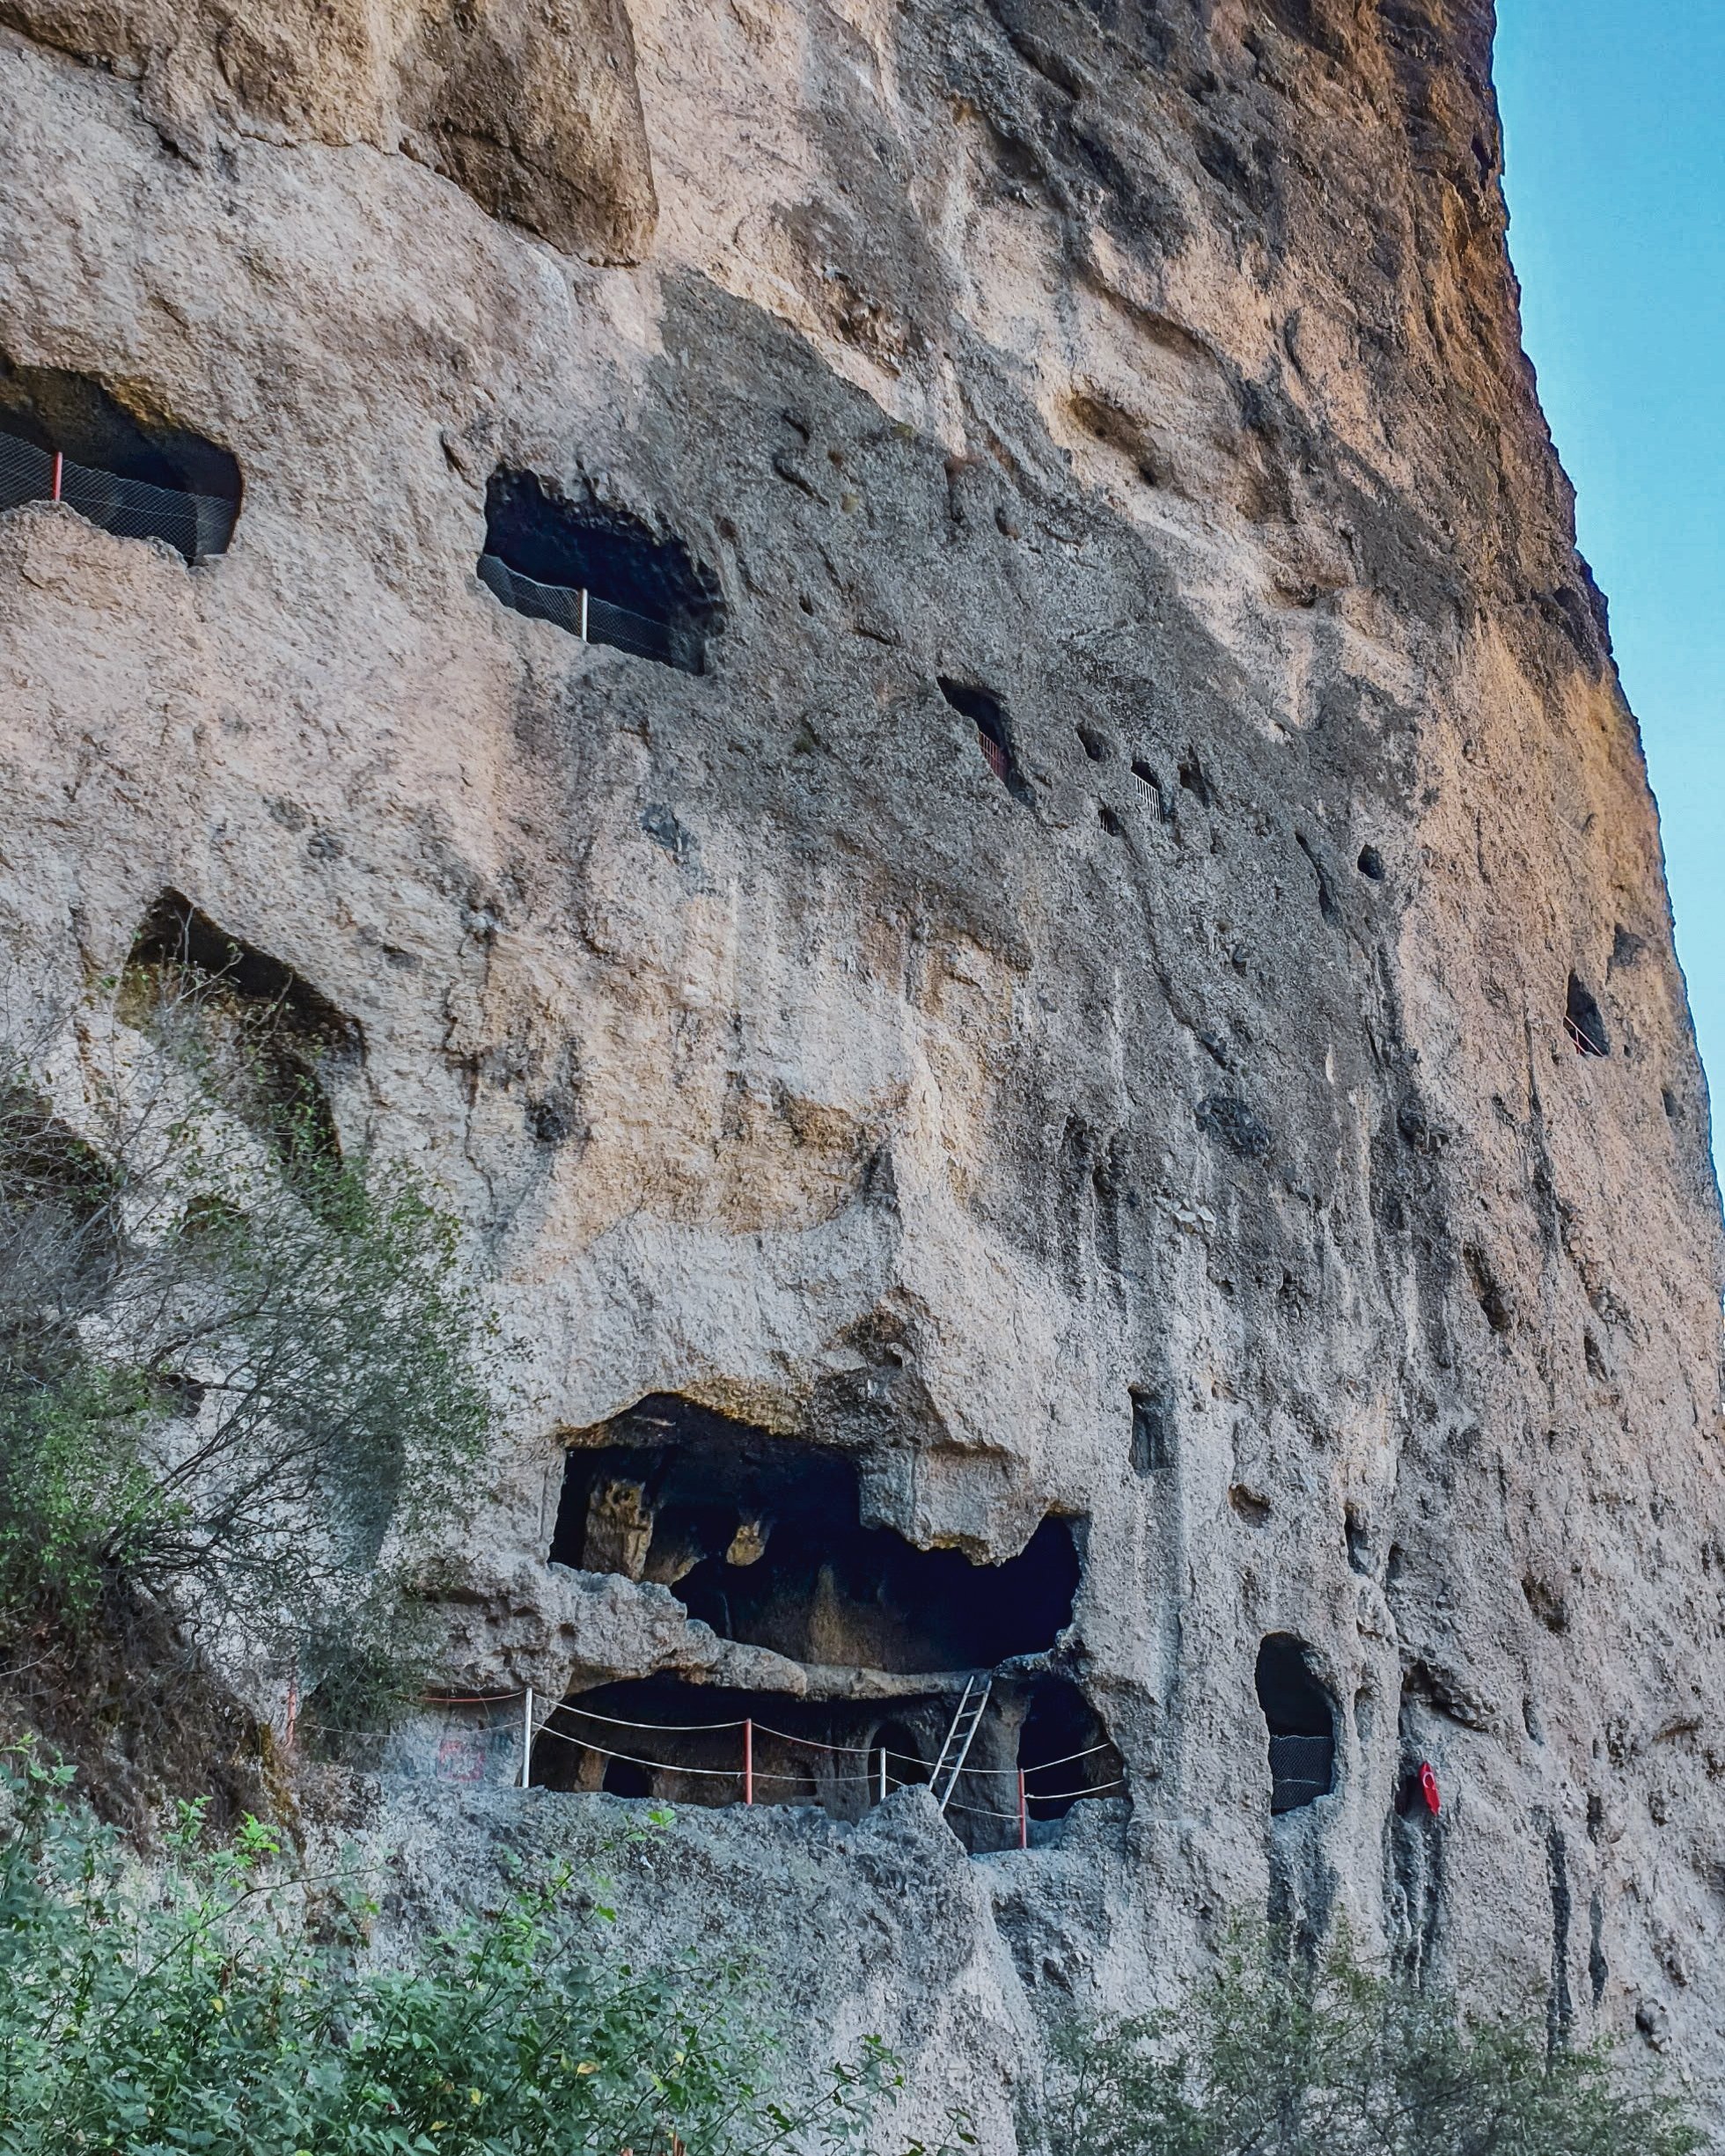 The exterior of İnönü Caves is rugged and mysterious. (Photo by Argun Konuk)